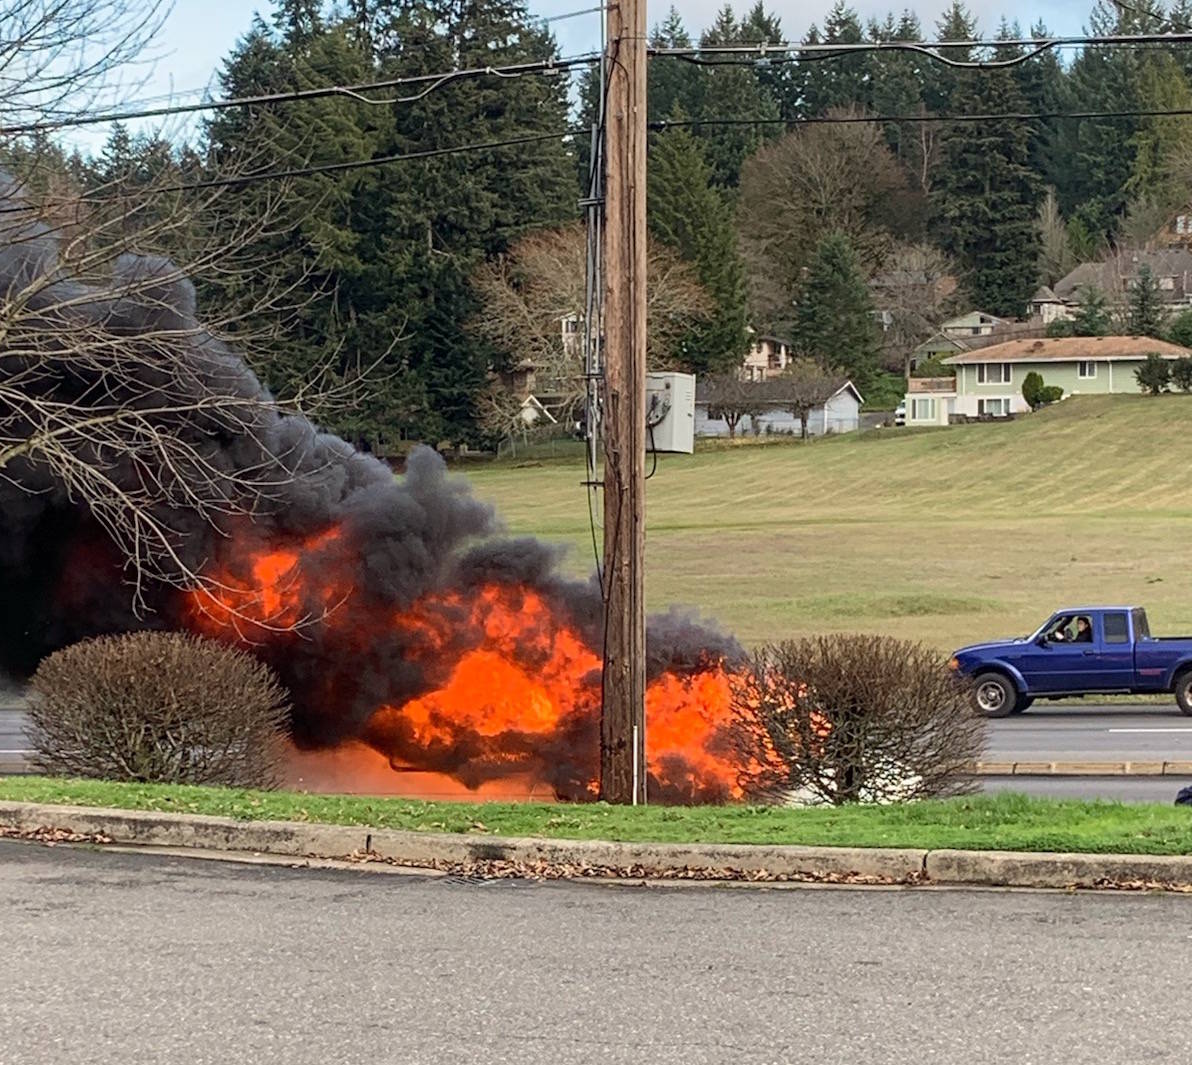 Vehicle fire destroys RV on Route 303 in Bremerton